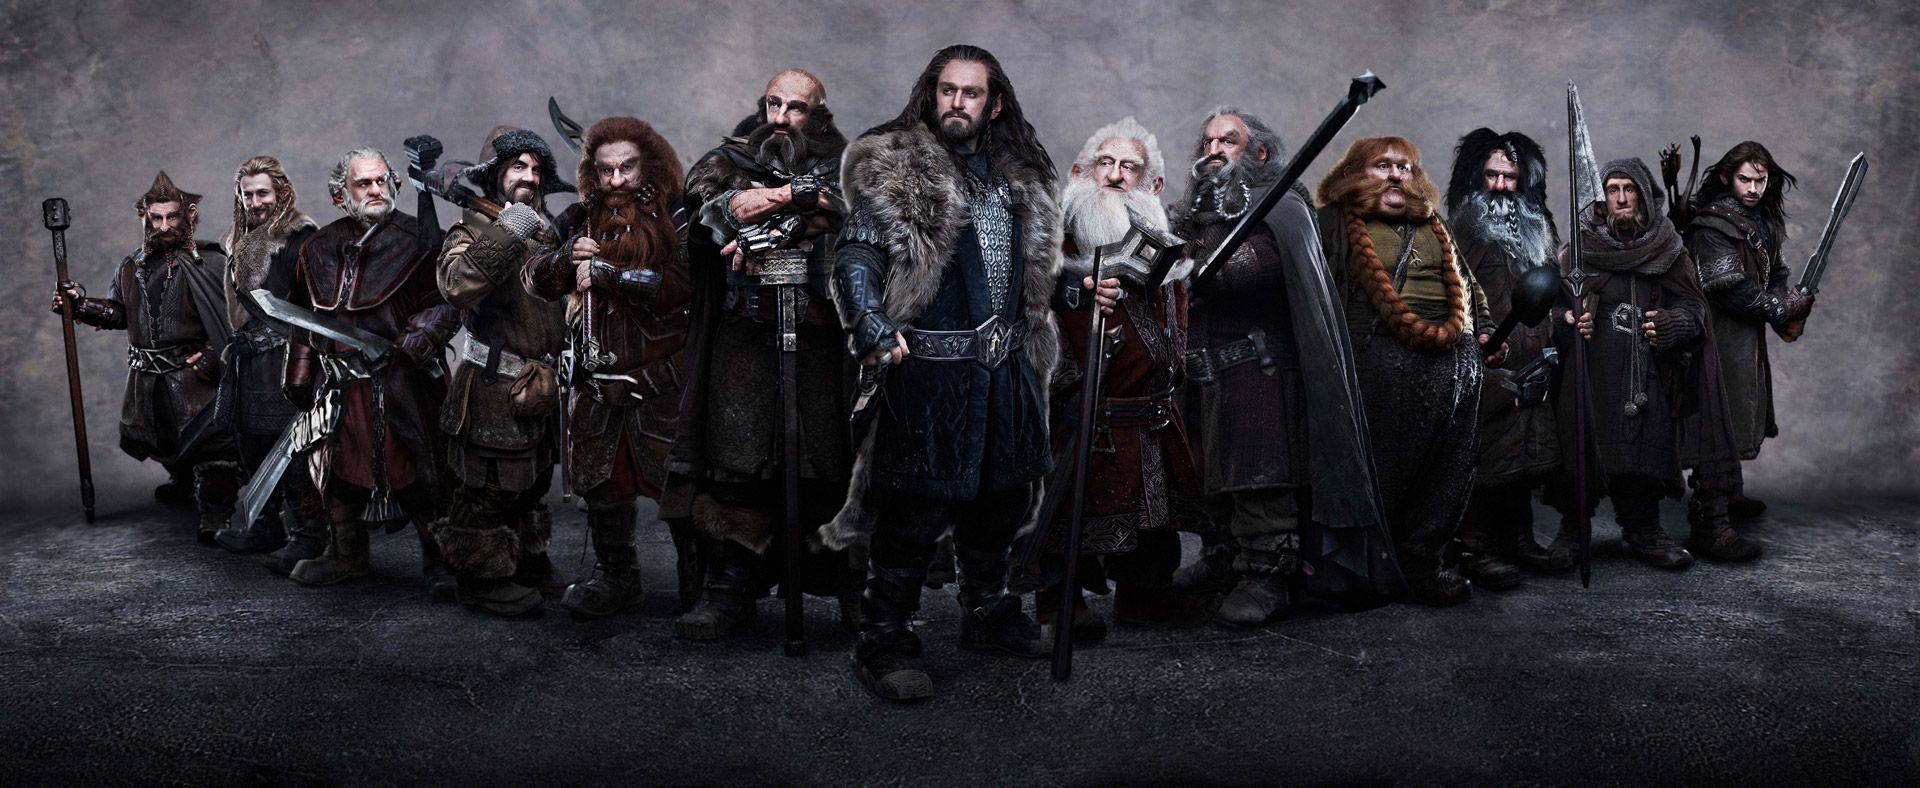 The Hobbit: An Unexpected Journey Set Visit Part 1: Getting to Know the Dwarves